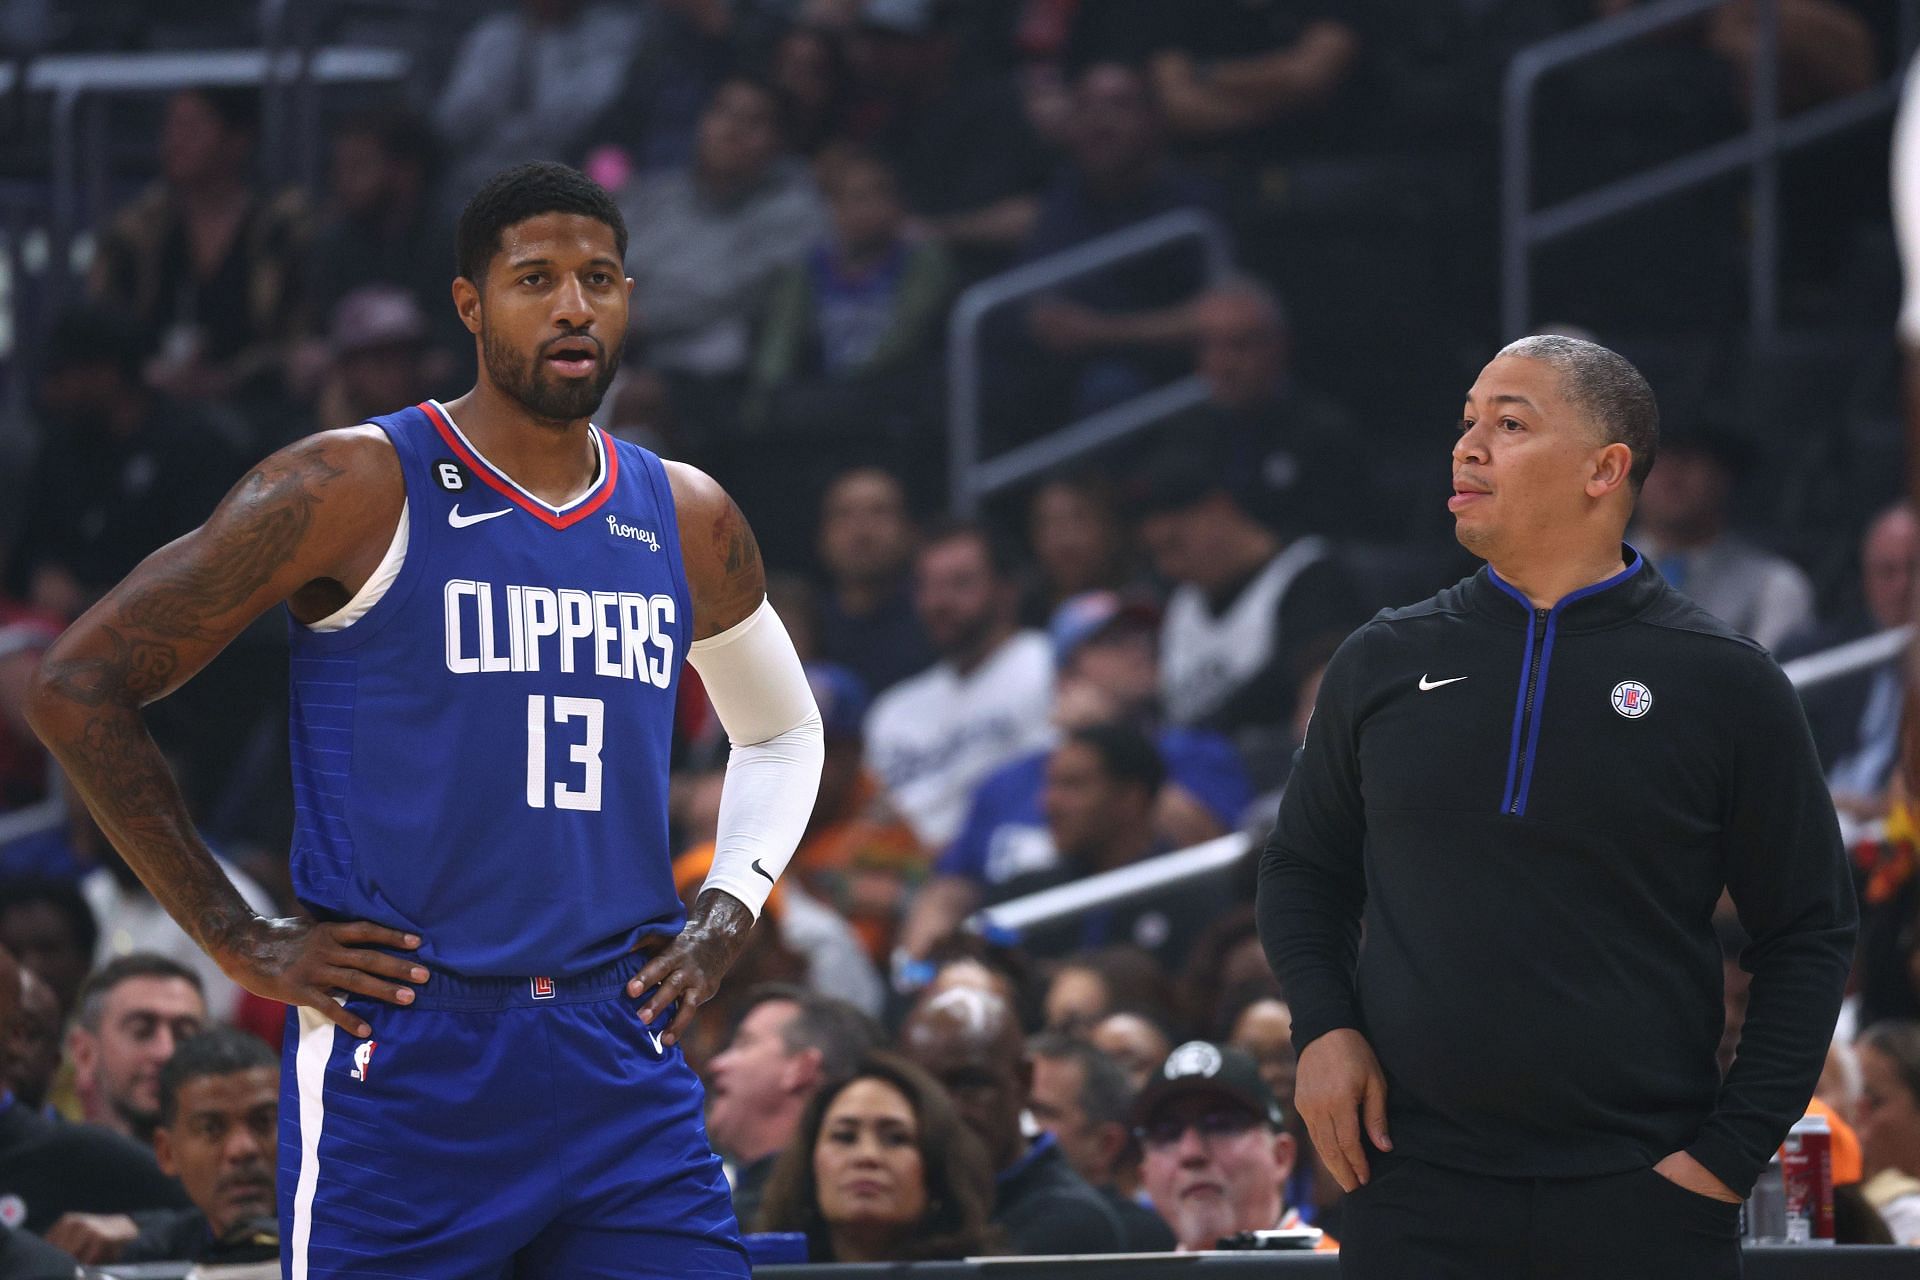 Clippers' Paul George avoids serious knee injury, team says